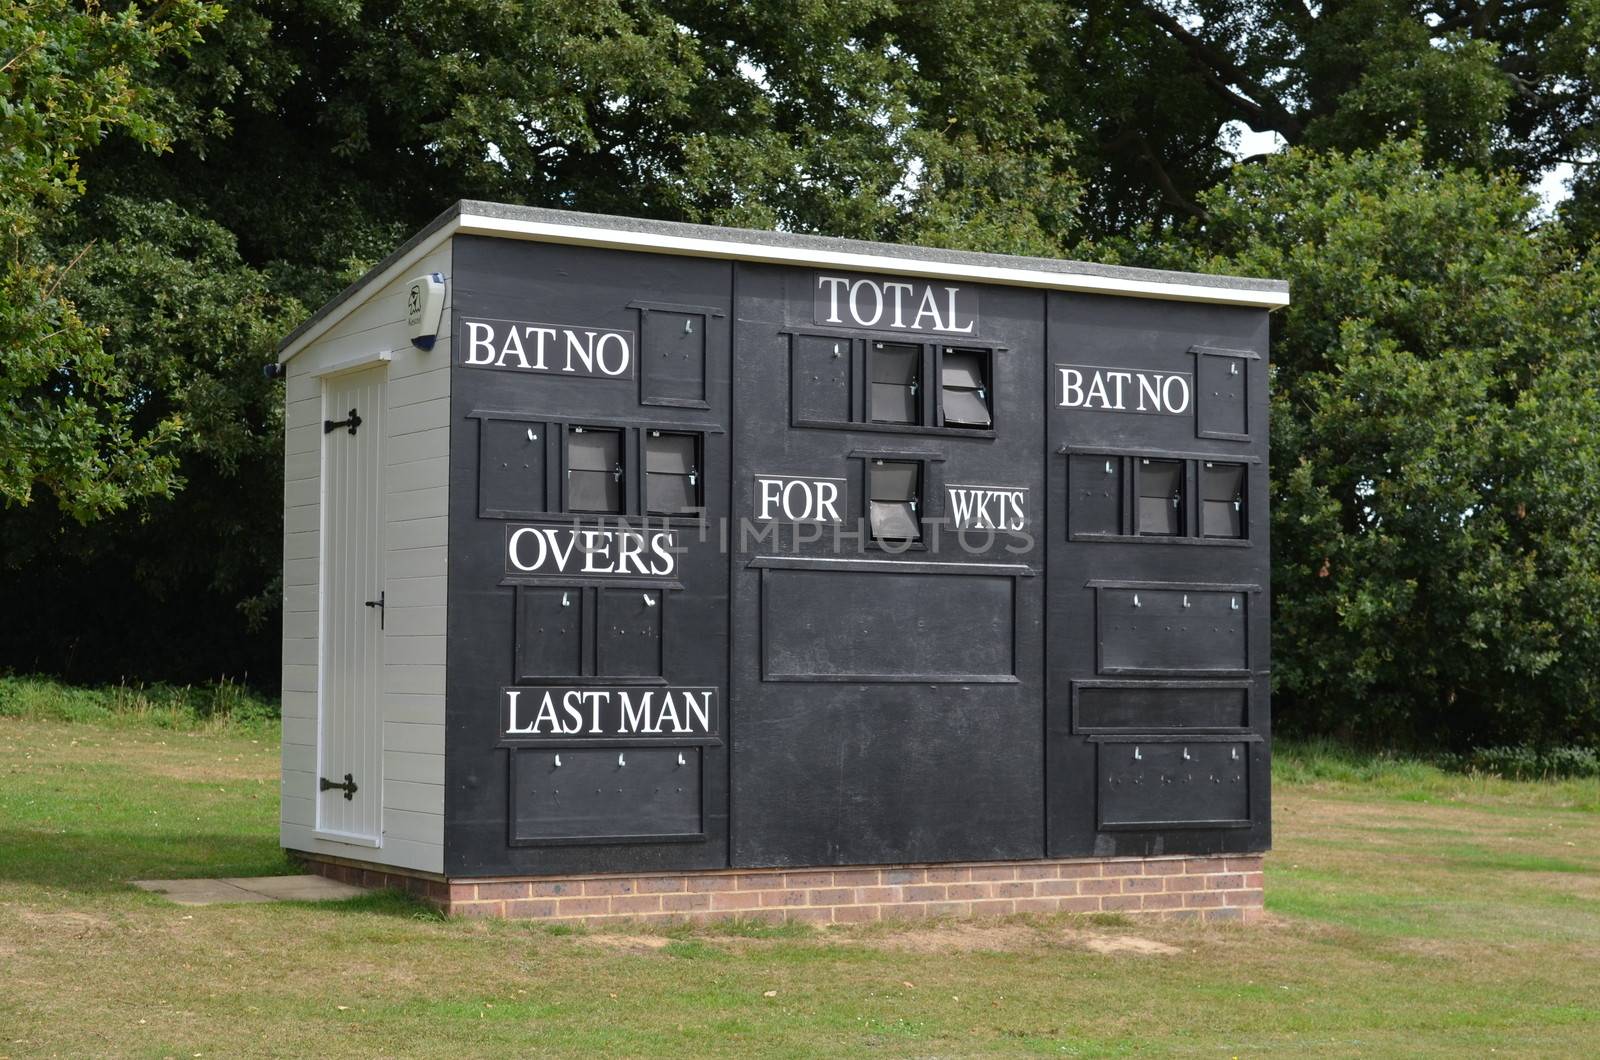 English scoreboard hut at a countryside cricket ground in Bolney village Southern England.